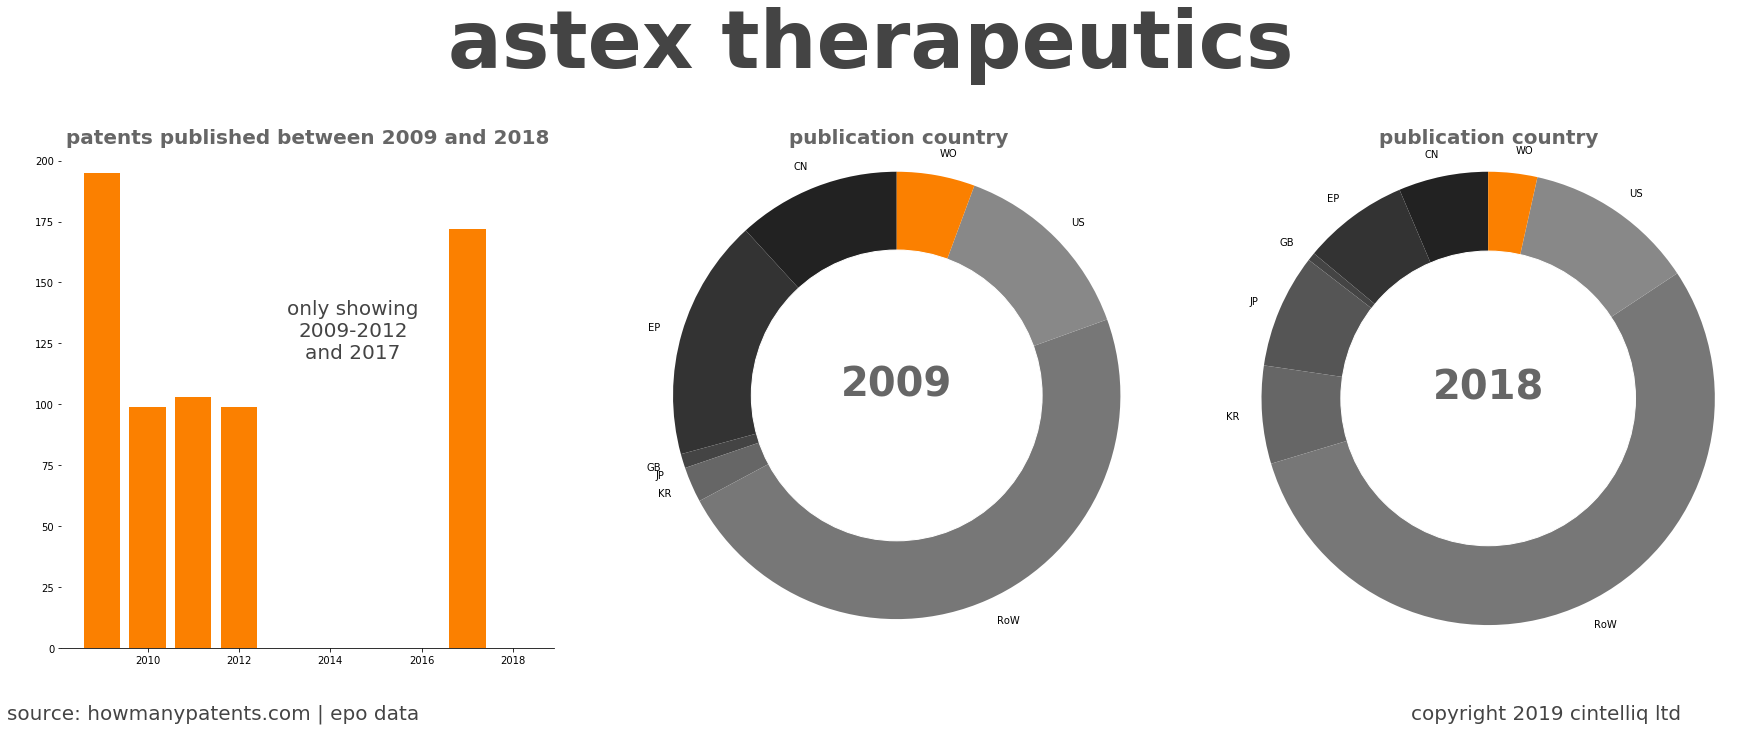 summary of patents for Astex Therapeutics